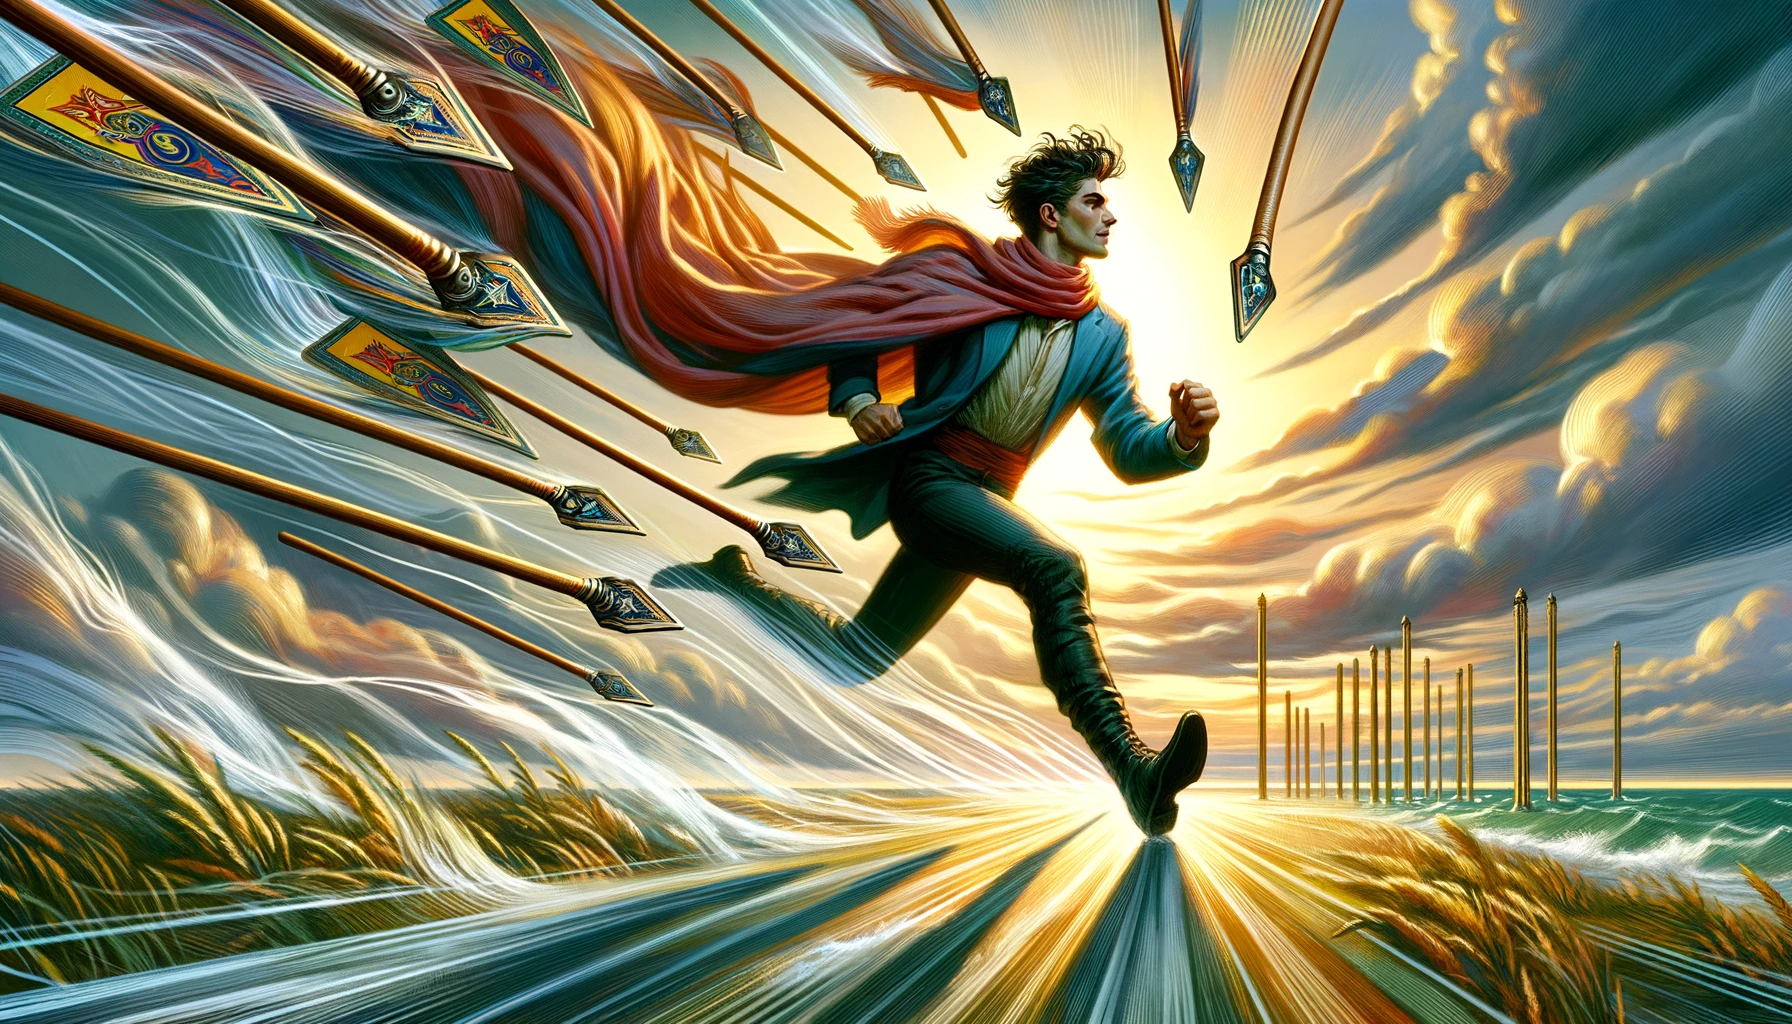 The image features a person in dynamic motion, embodying rapid movement and swift decision-making towards their goals. Set against a vibrant backdrop of swirling colors and energetic patterns, the scene captures the person's urgency and commitment to progress. The visual representation enriches the article by highlighting their energetic flow and determination to seize opportunities, emphasizing the fast pace at which they operate in pursuit of their objectives.